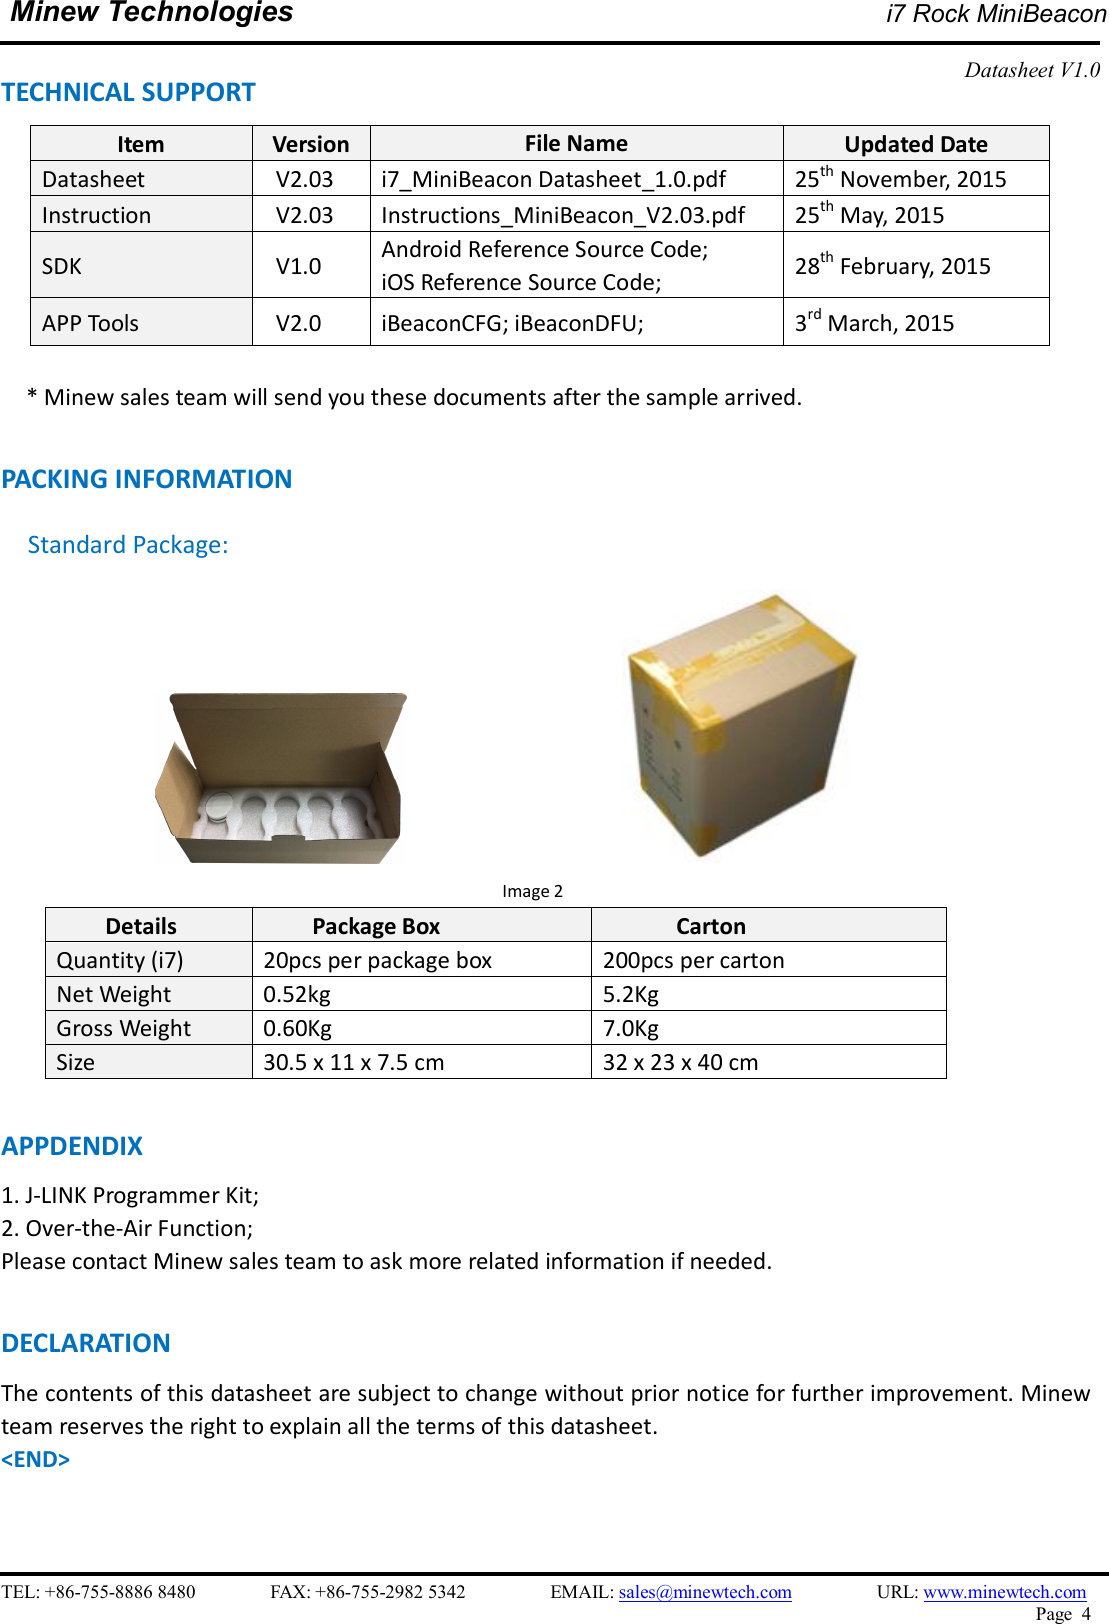    TEL: +86-755-8886 8480                FAX: +86-755-2982 5342                  EMAIL: sales@minewtech.com                  URL: www.minewtech.com Page  4  Minew Technologies i7 Rock MiniBeacon  Datasheet V1.0   TECHNICAL SUPPORT Item  Version  File Name  Updated Date Datasheet  V2.03  i7_MiniBeacon Datasheet_1.0.pdf  25th November, 2015 Instruction  V2.03  Instructions_MiniBeacon_V2.03.pdf  25th May, 2015 SDK    V1.0  Android Reference Source Code;   iOS Reference Source Code;  28th February, 2015 APP Tools    V2.0  iBeaconCFG; iBeaconDFU;  3rd March, 2015     * Minew sales team will send you these documents after the sample arrived.  PACKING INFORMATION Standard Package:                                                                         Image 2 Details  Package Box  Carton Quantity (i7)  20pcs per package box  200pcs per carton Net Weight  0.52kg  5.2Kg Gross Weight  0.60Kg  7.0Kg Size  30.5 x 11 x 7.5 cm  32 x 23 x 40 cm  APPDENDIX 1. J-LINK Programmer Kit;   2. Over-the-Air Function; Please contact Minew sales team to ask more related information if needed.  DECLARATION The contents of this datasheet are subject to change without prior notice for further improvement. Minew team reserves the right to explain all the terms of this datasheet.   &lt;END&gt; 